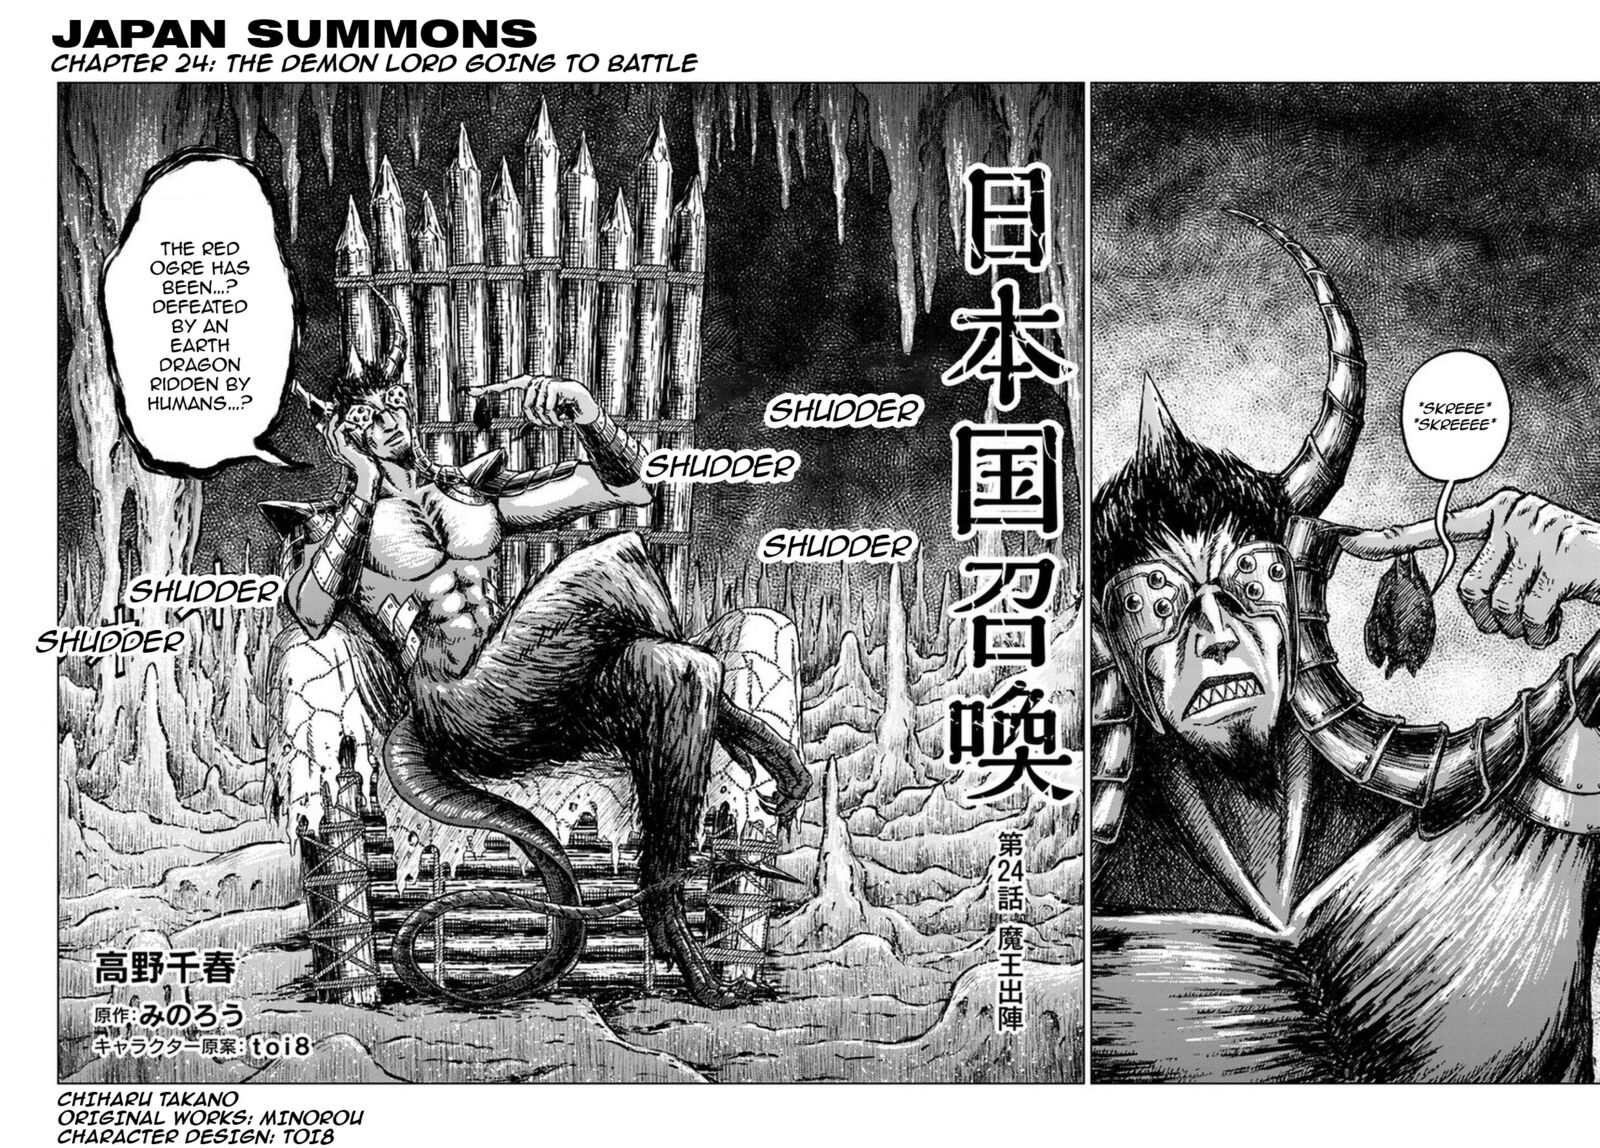 Japan Summons Chapter 24 Page 2